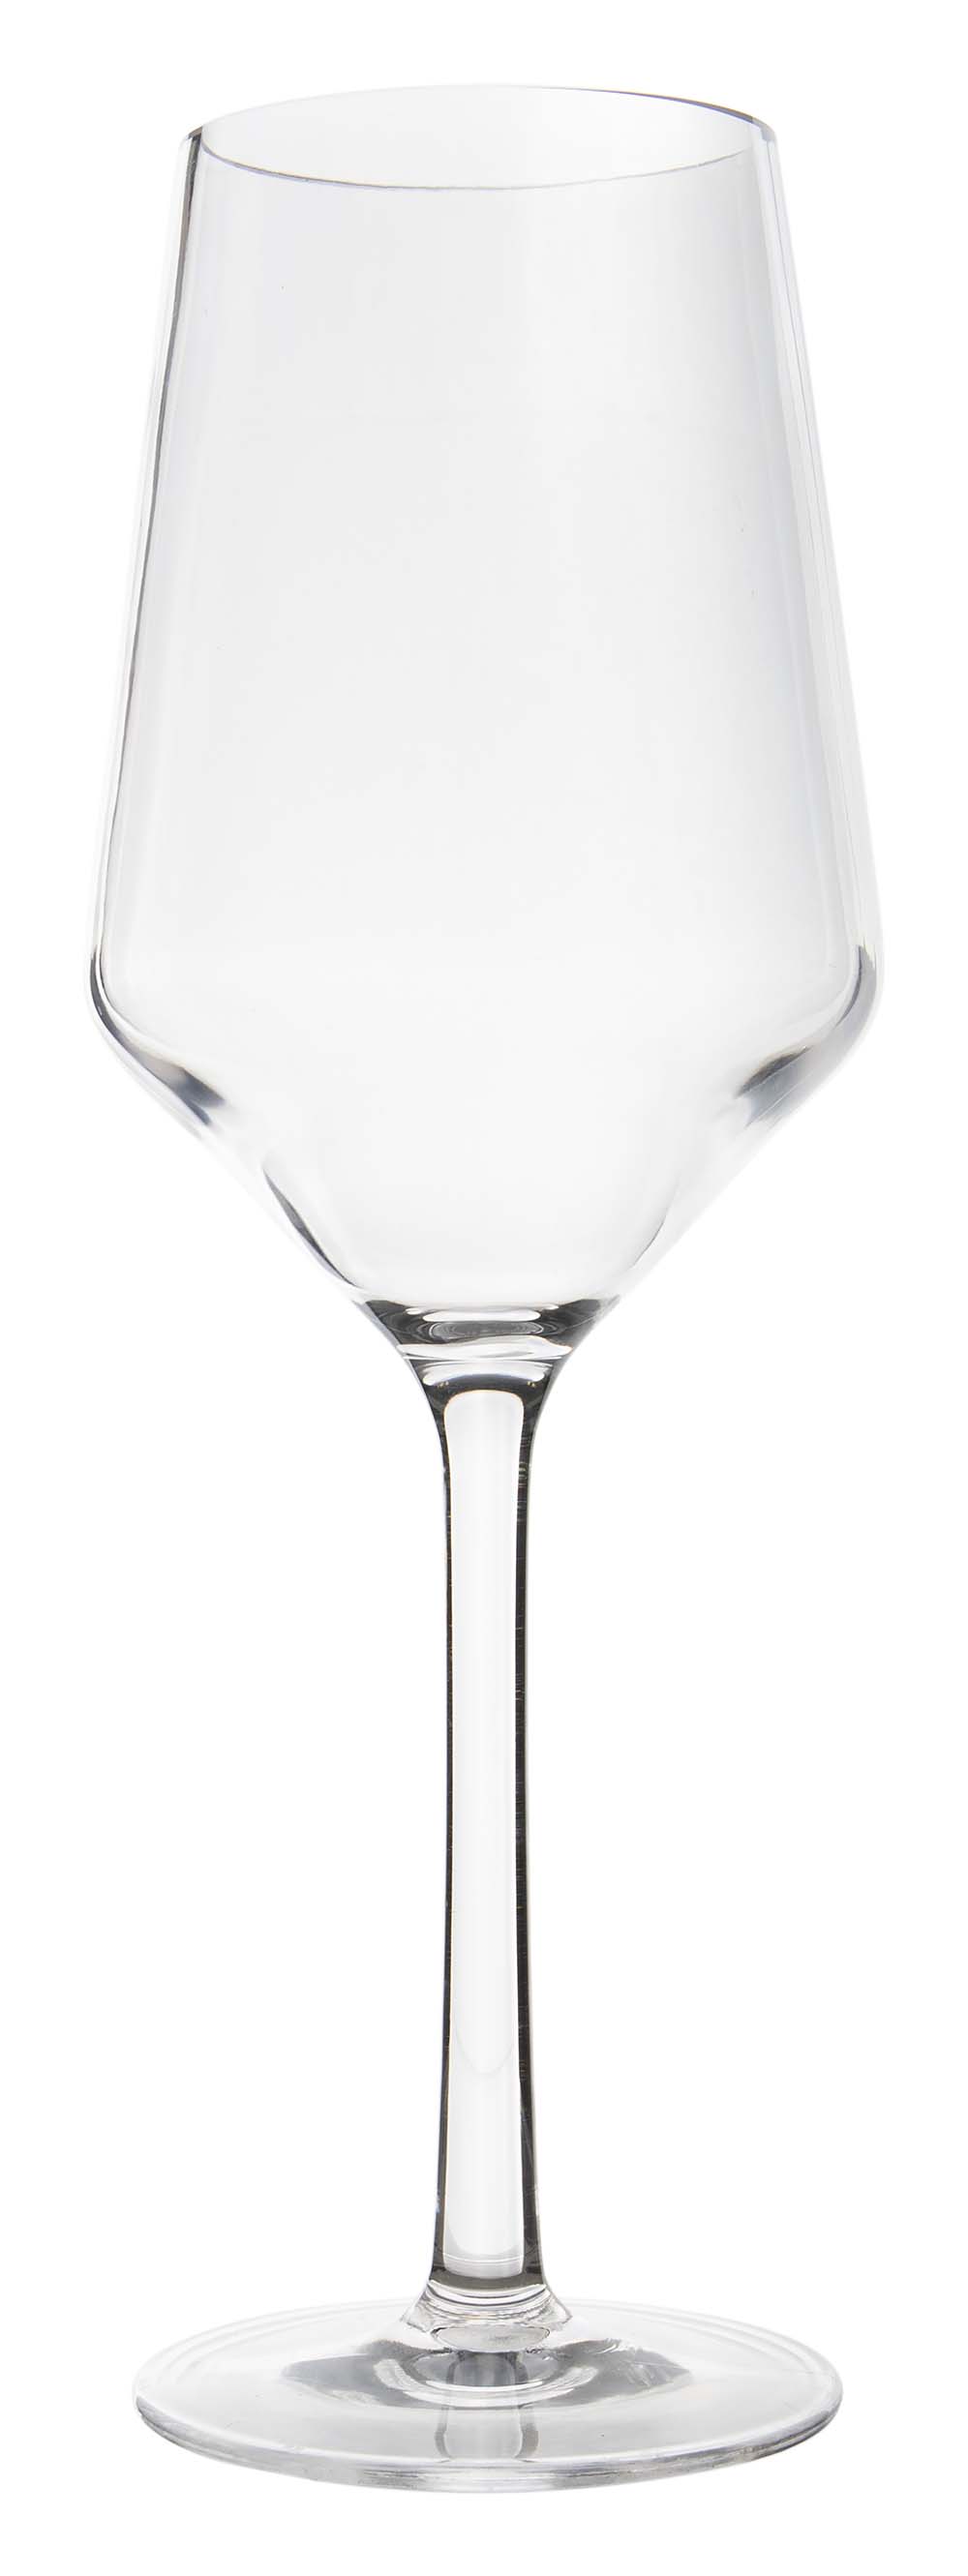 6914180 A stylish white wine glass from the Solid line collection. Virtually unbreakable due to high quality MS material. Consists of a set of 2 pieces. Very easy to clean and long lasting, which makes the glass very durable. In addition, the white wine glass is very lightweight and scratch resistant. Capacity: 275 ml.